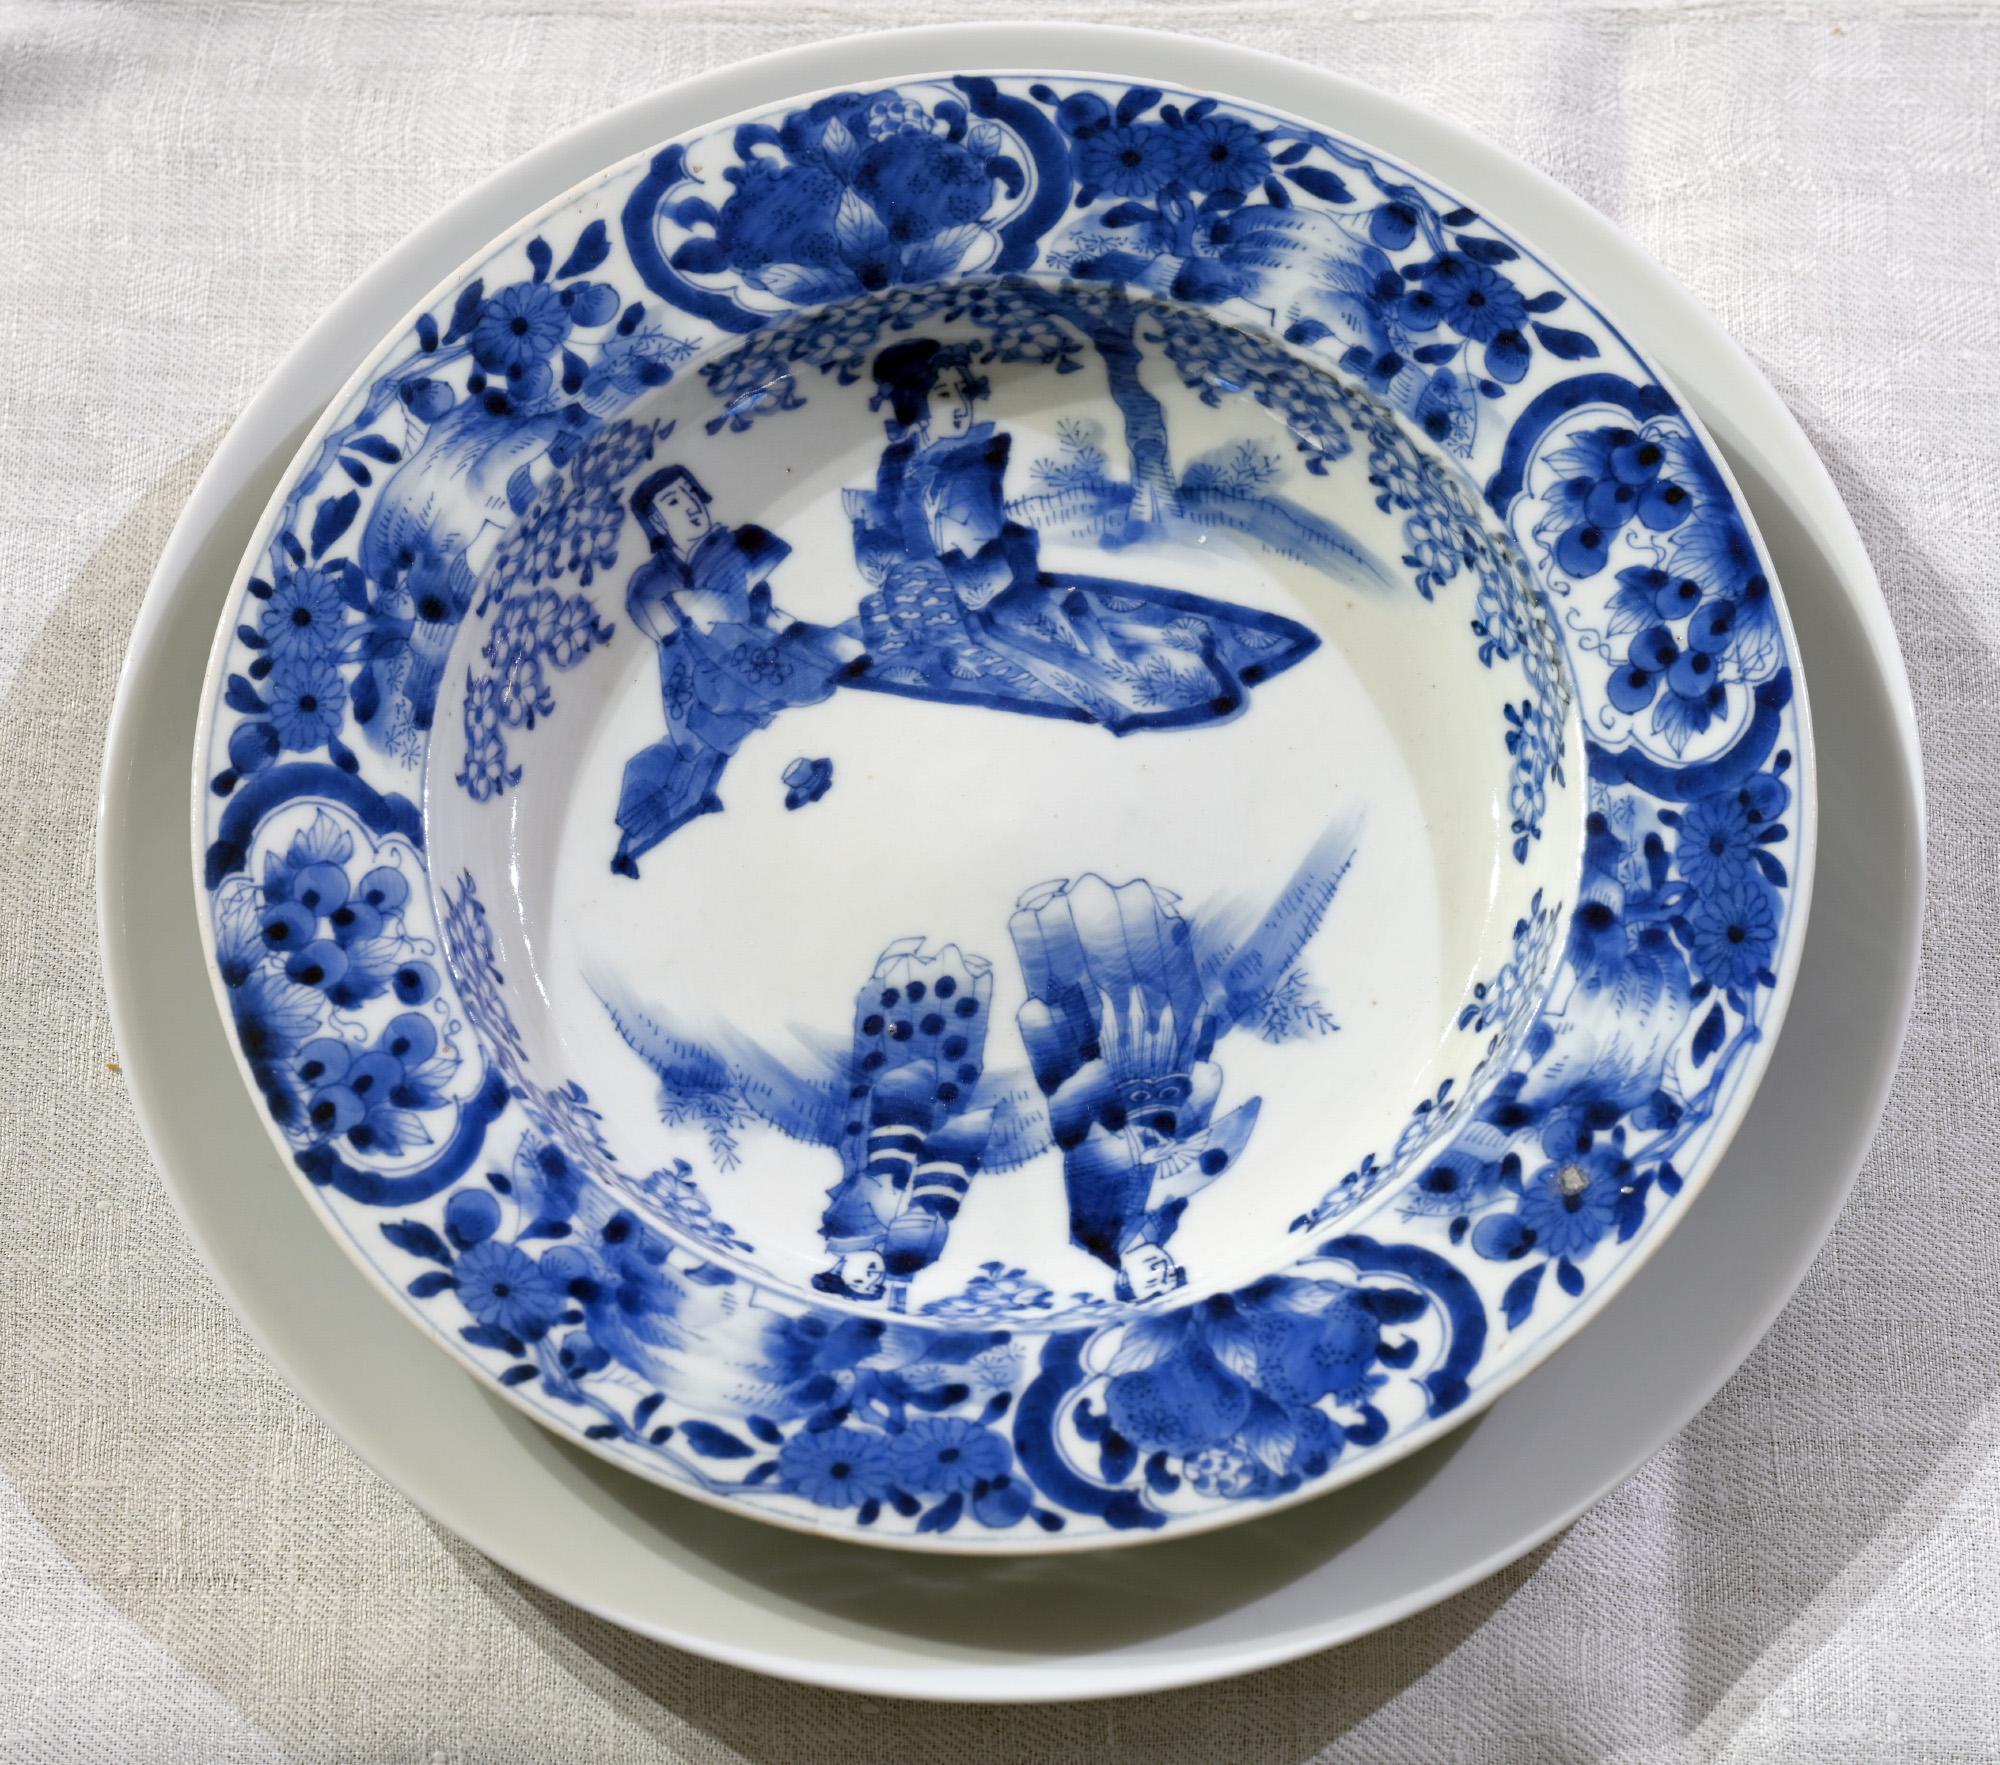 Unusual Set of 18th Century Blue and White Plates, Platers and Lidded Plates In Good Condition For Sale In Epfach, DE